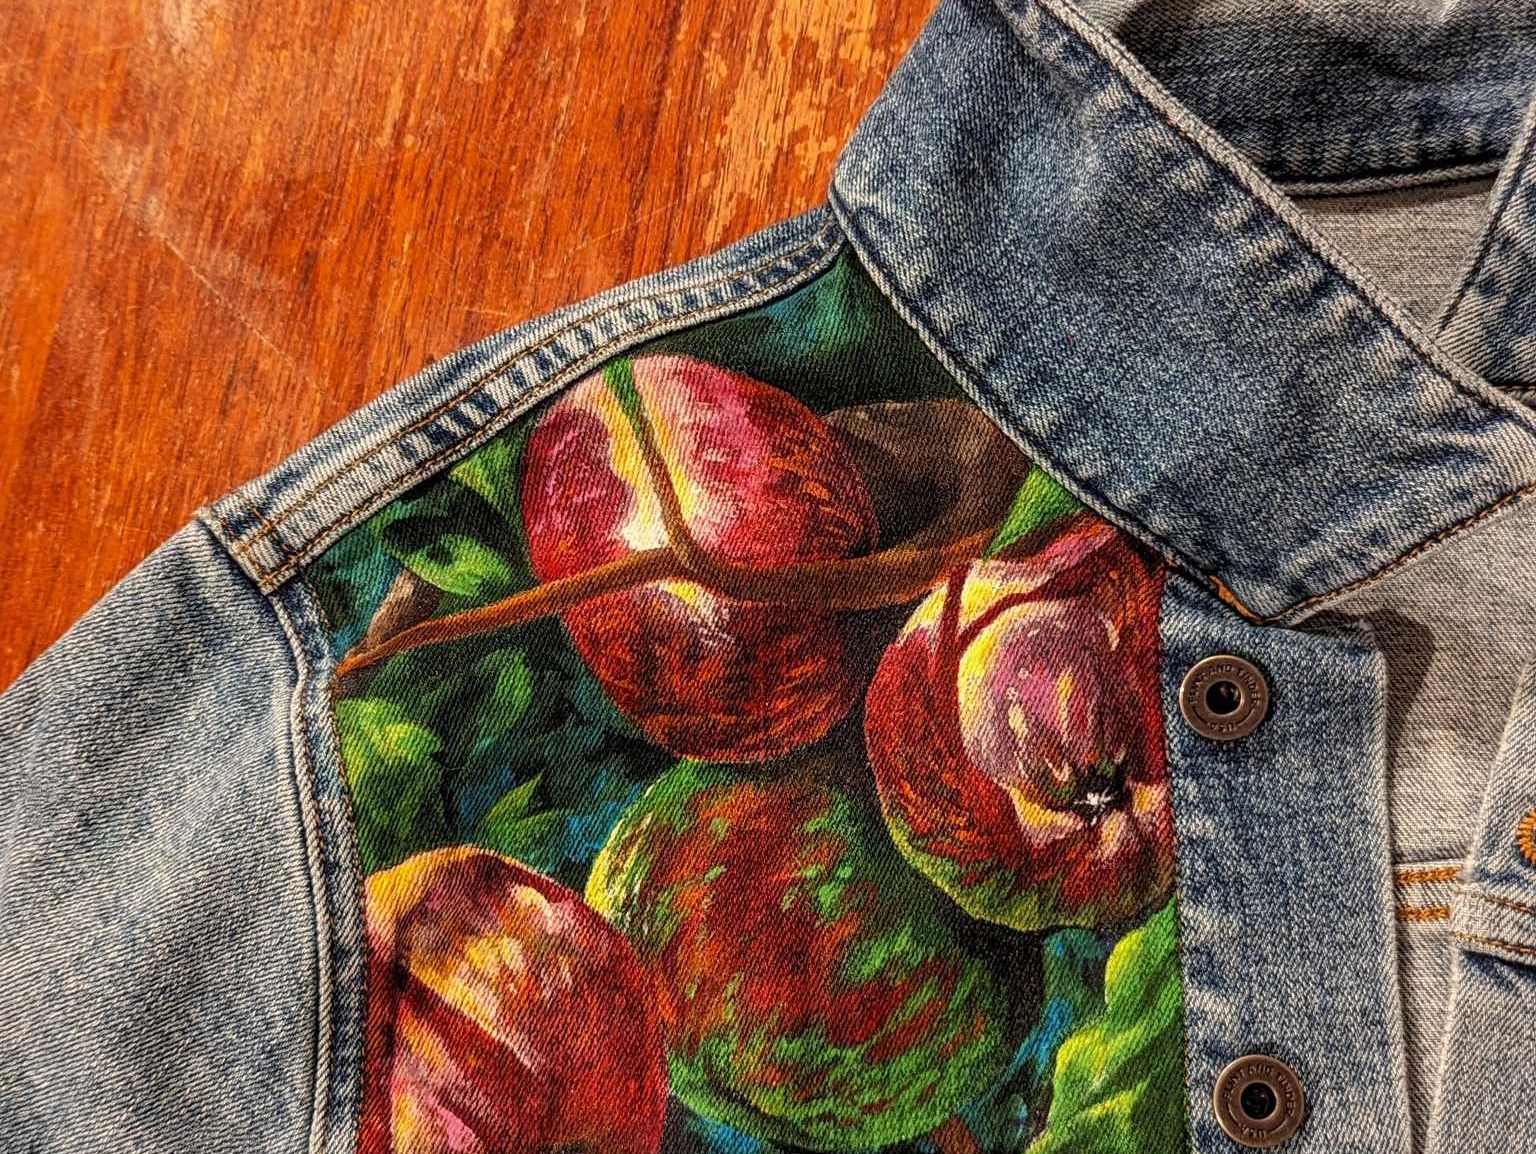 A denim jacket with one panel painted to show a close up of red apples on a tree in dappled sunlight